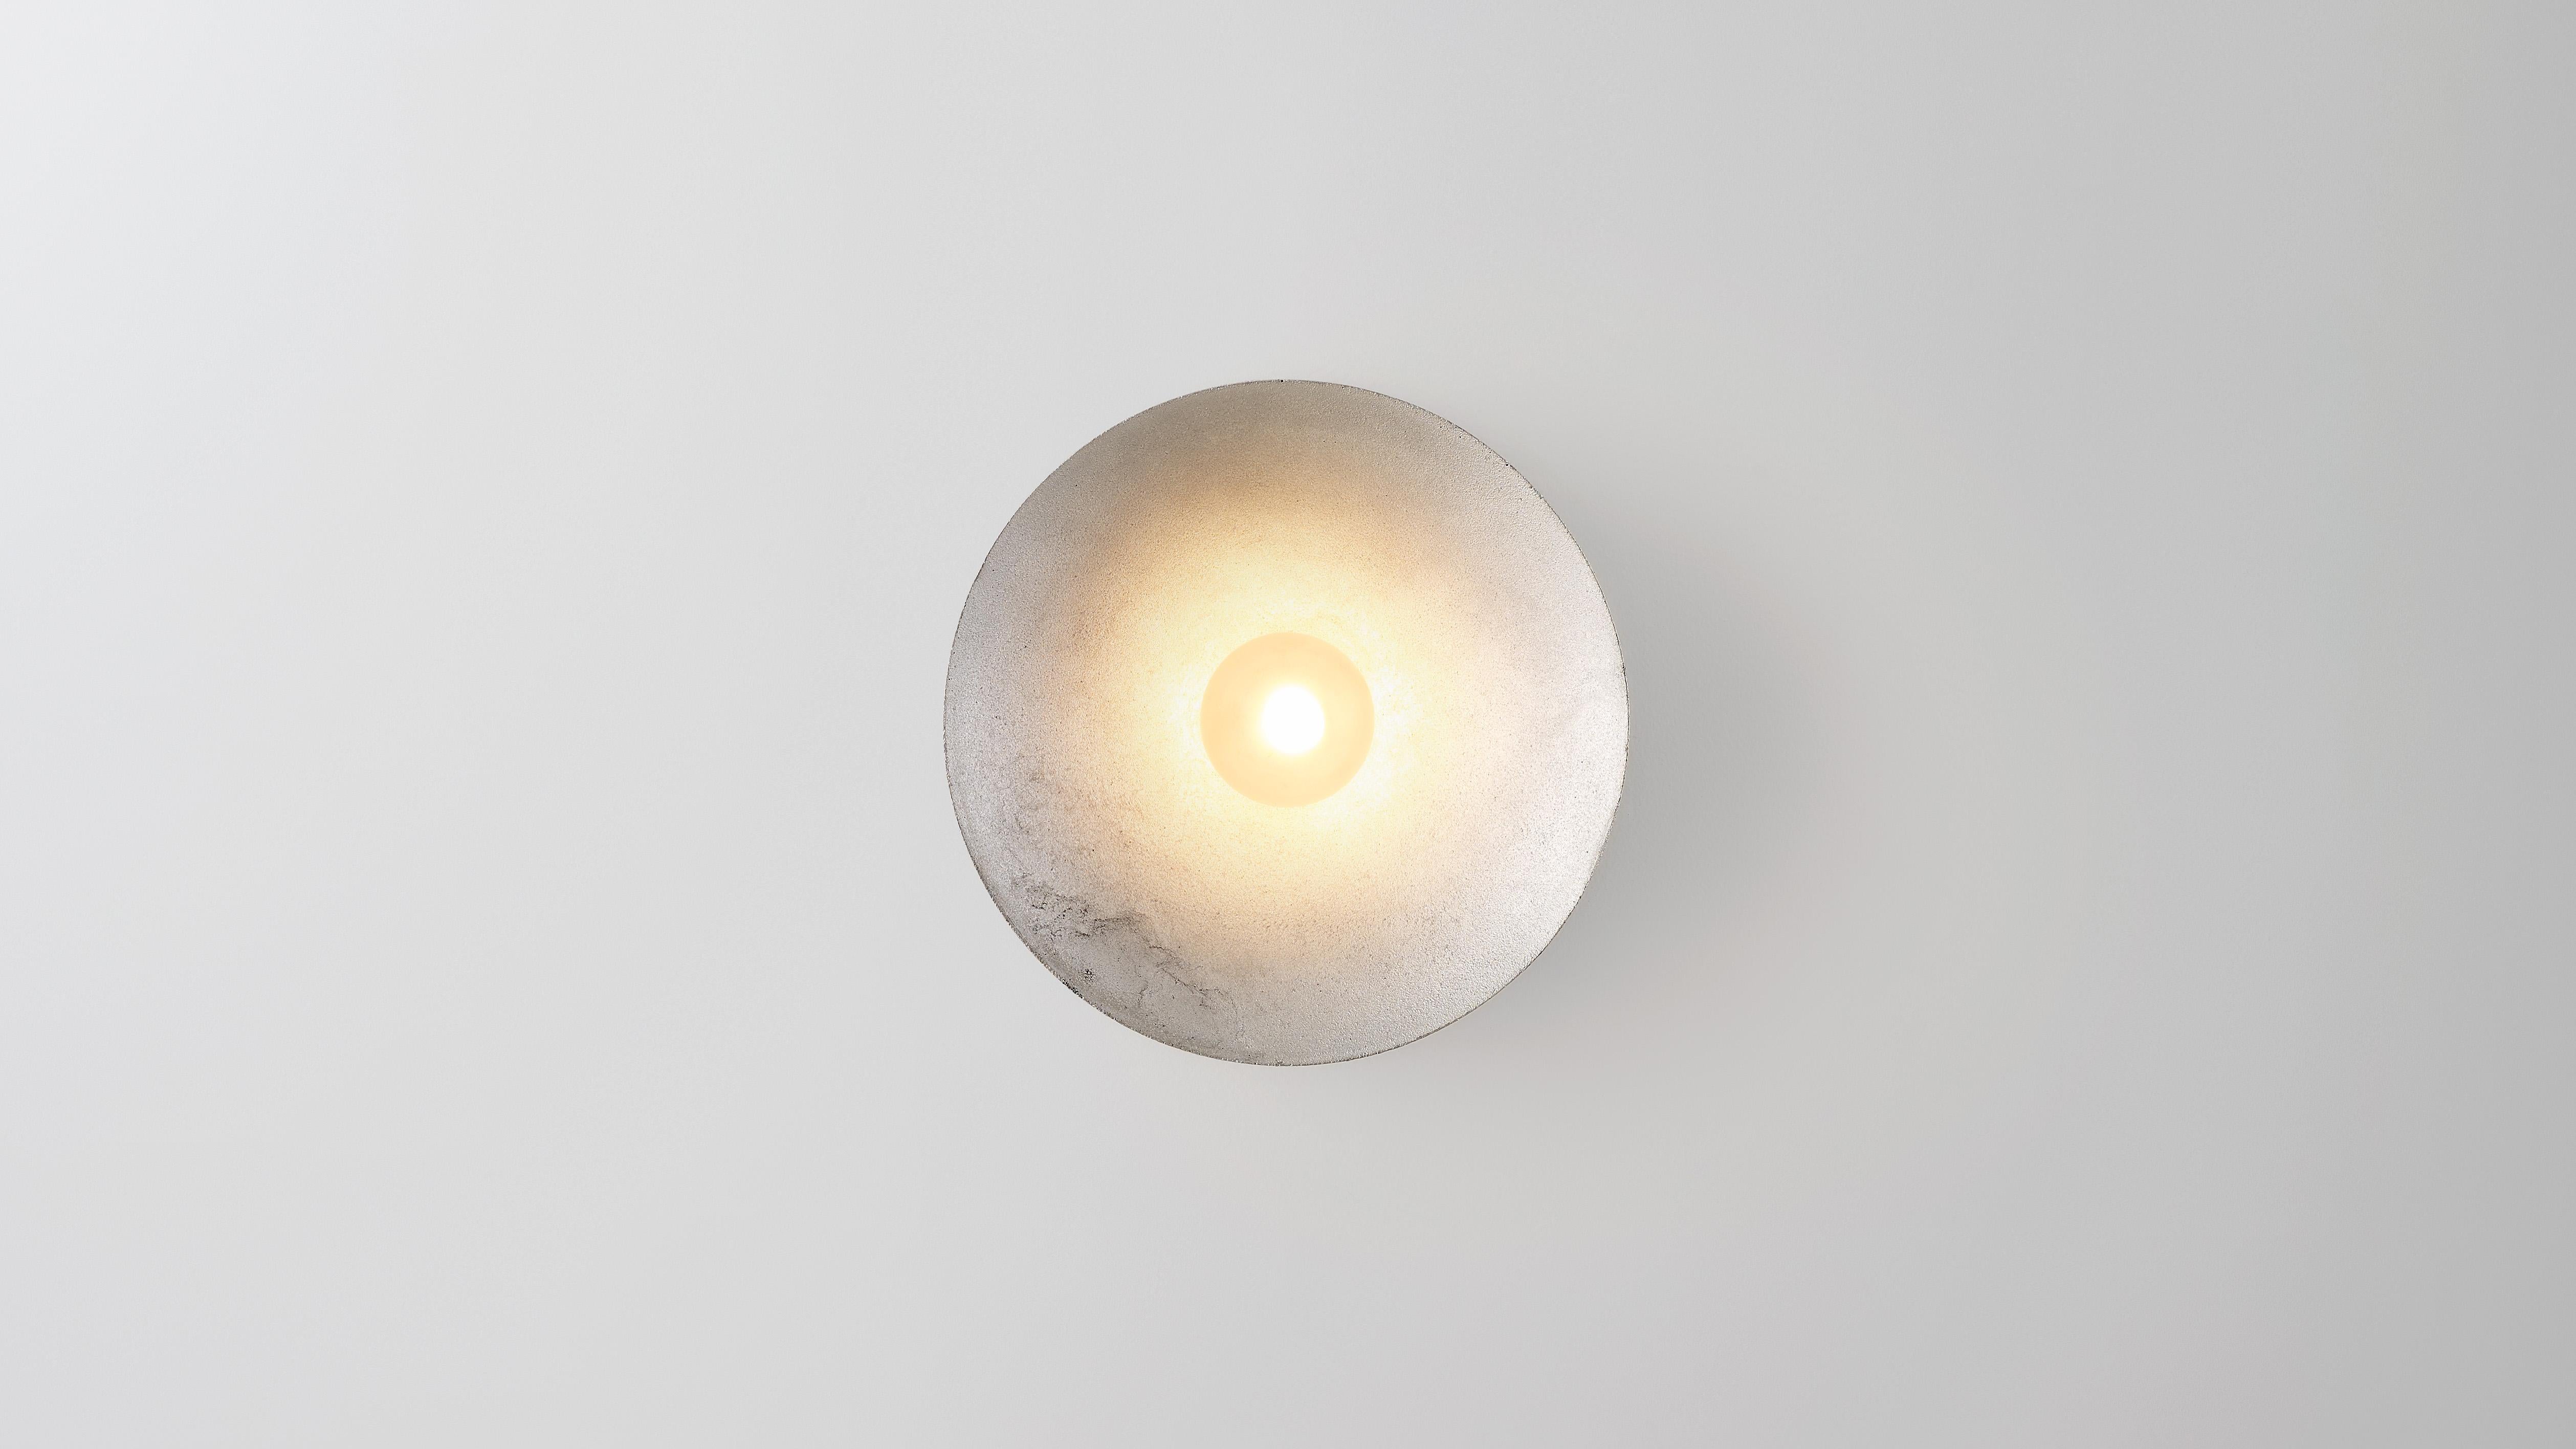 Aluminum Anton wall scounce by Volker Haug
Dimensions: Ø 18 x D 10 cm. 
Material: Cast Aluminum.
Finish: Raw
Lamp: G9 LED (240V / 120V US). 12V option is available.
Glass Bulb: 45mm ø, Frosted
Weight: 1.5kg (Aluminium)
Available in Gunmetal.
All our